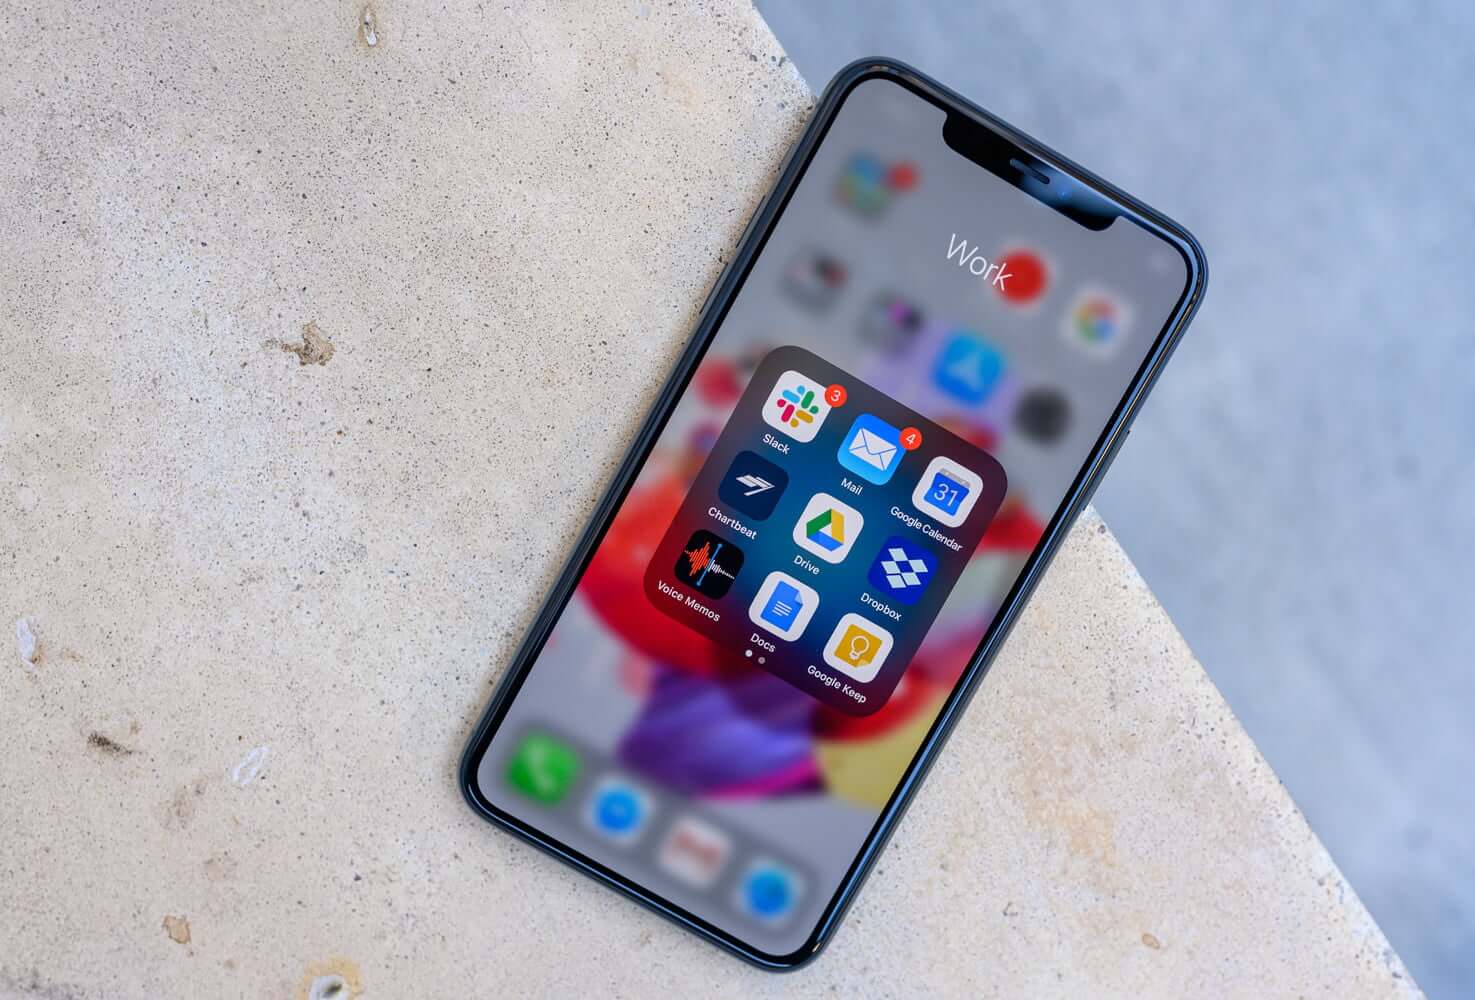 Some iPhone owners are reporting that iOS 13 closes background apps too aggressively